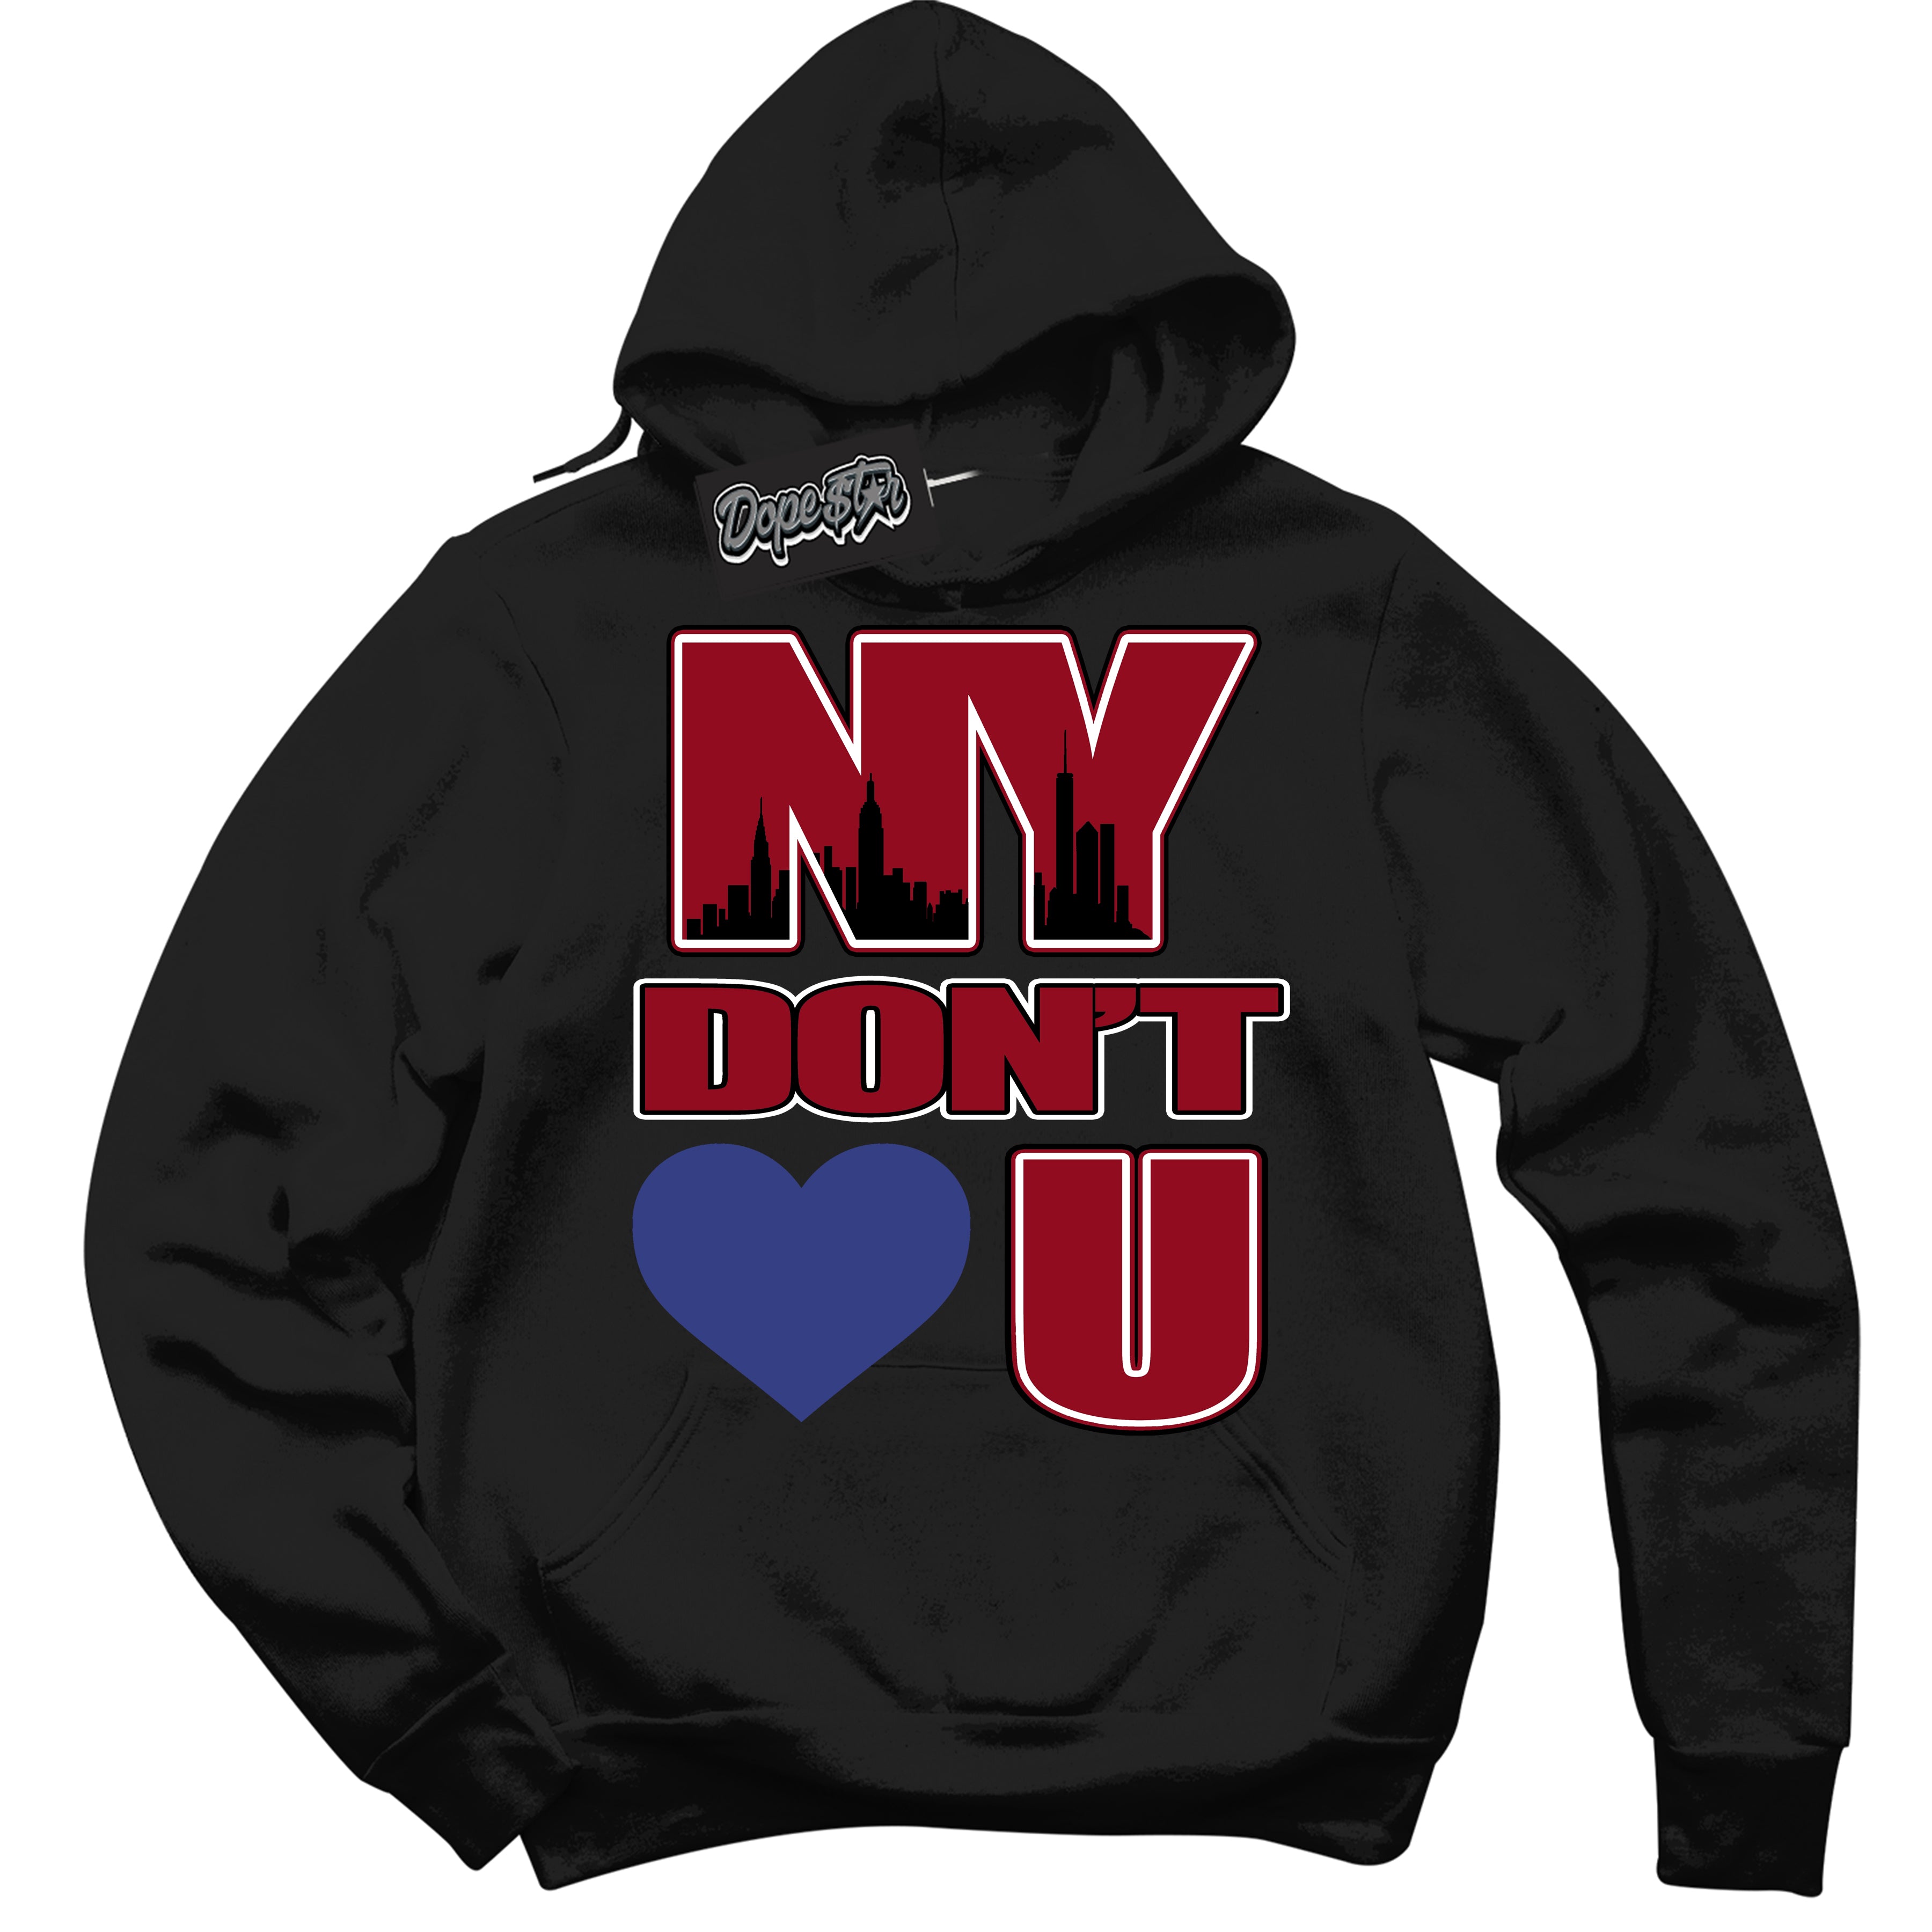 Cool Black Hoodie with “ NY Don't Love You ”  design that Perfectly Matches Playoffs 8s Sneakers.